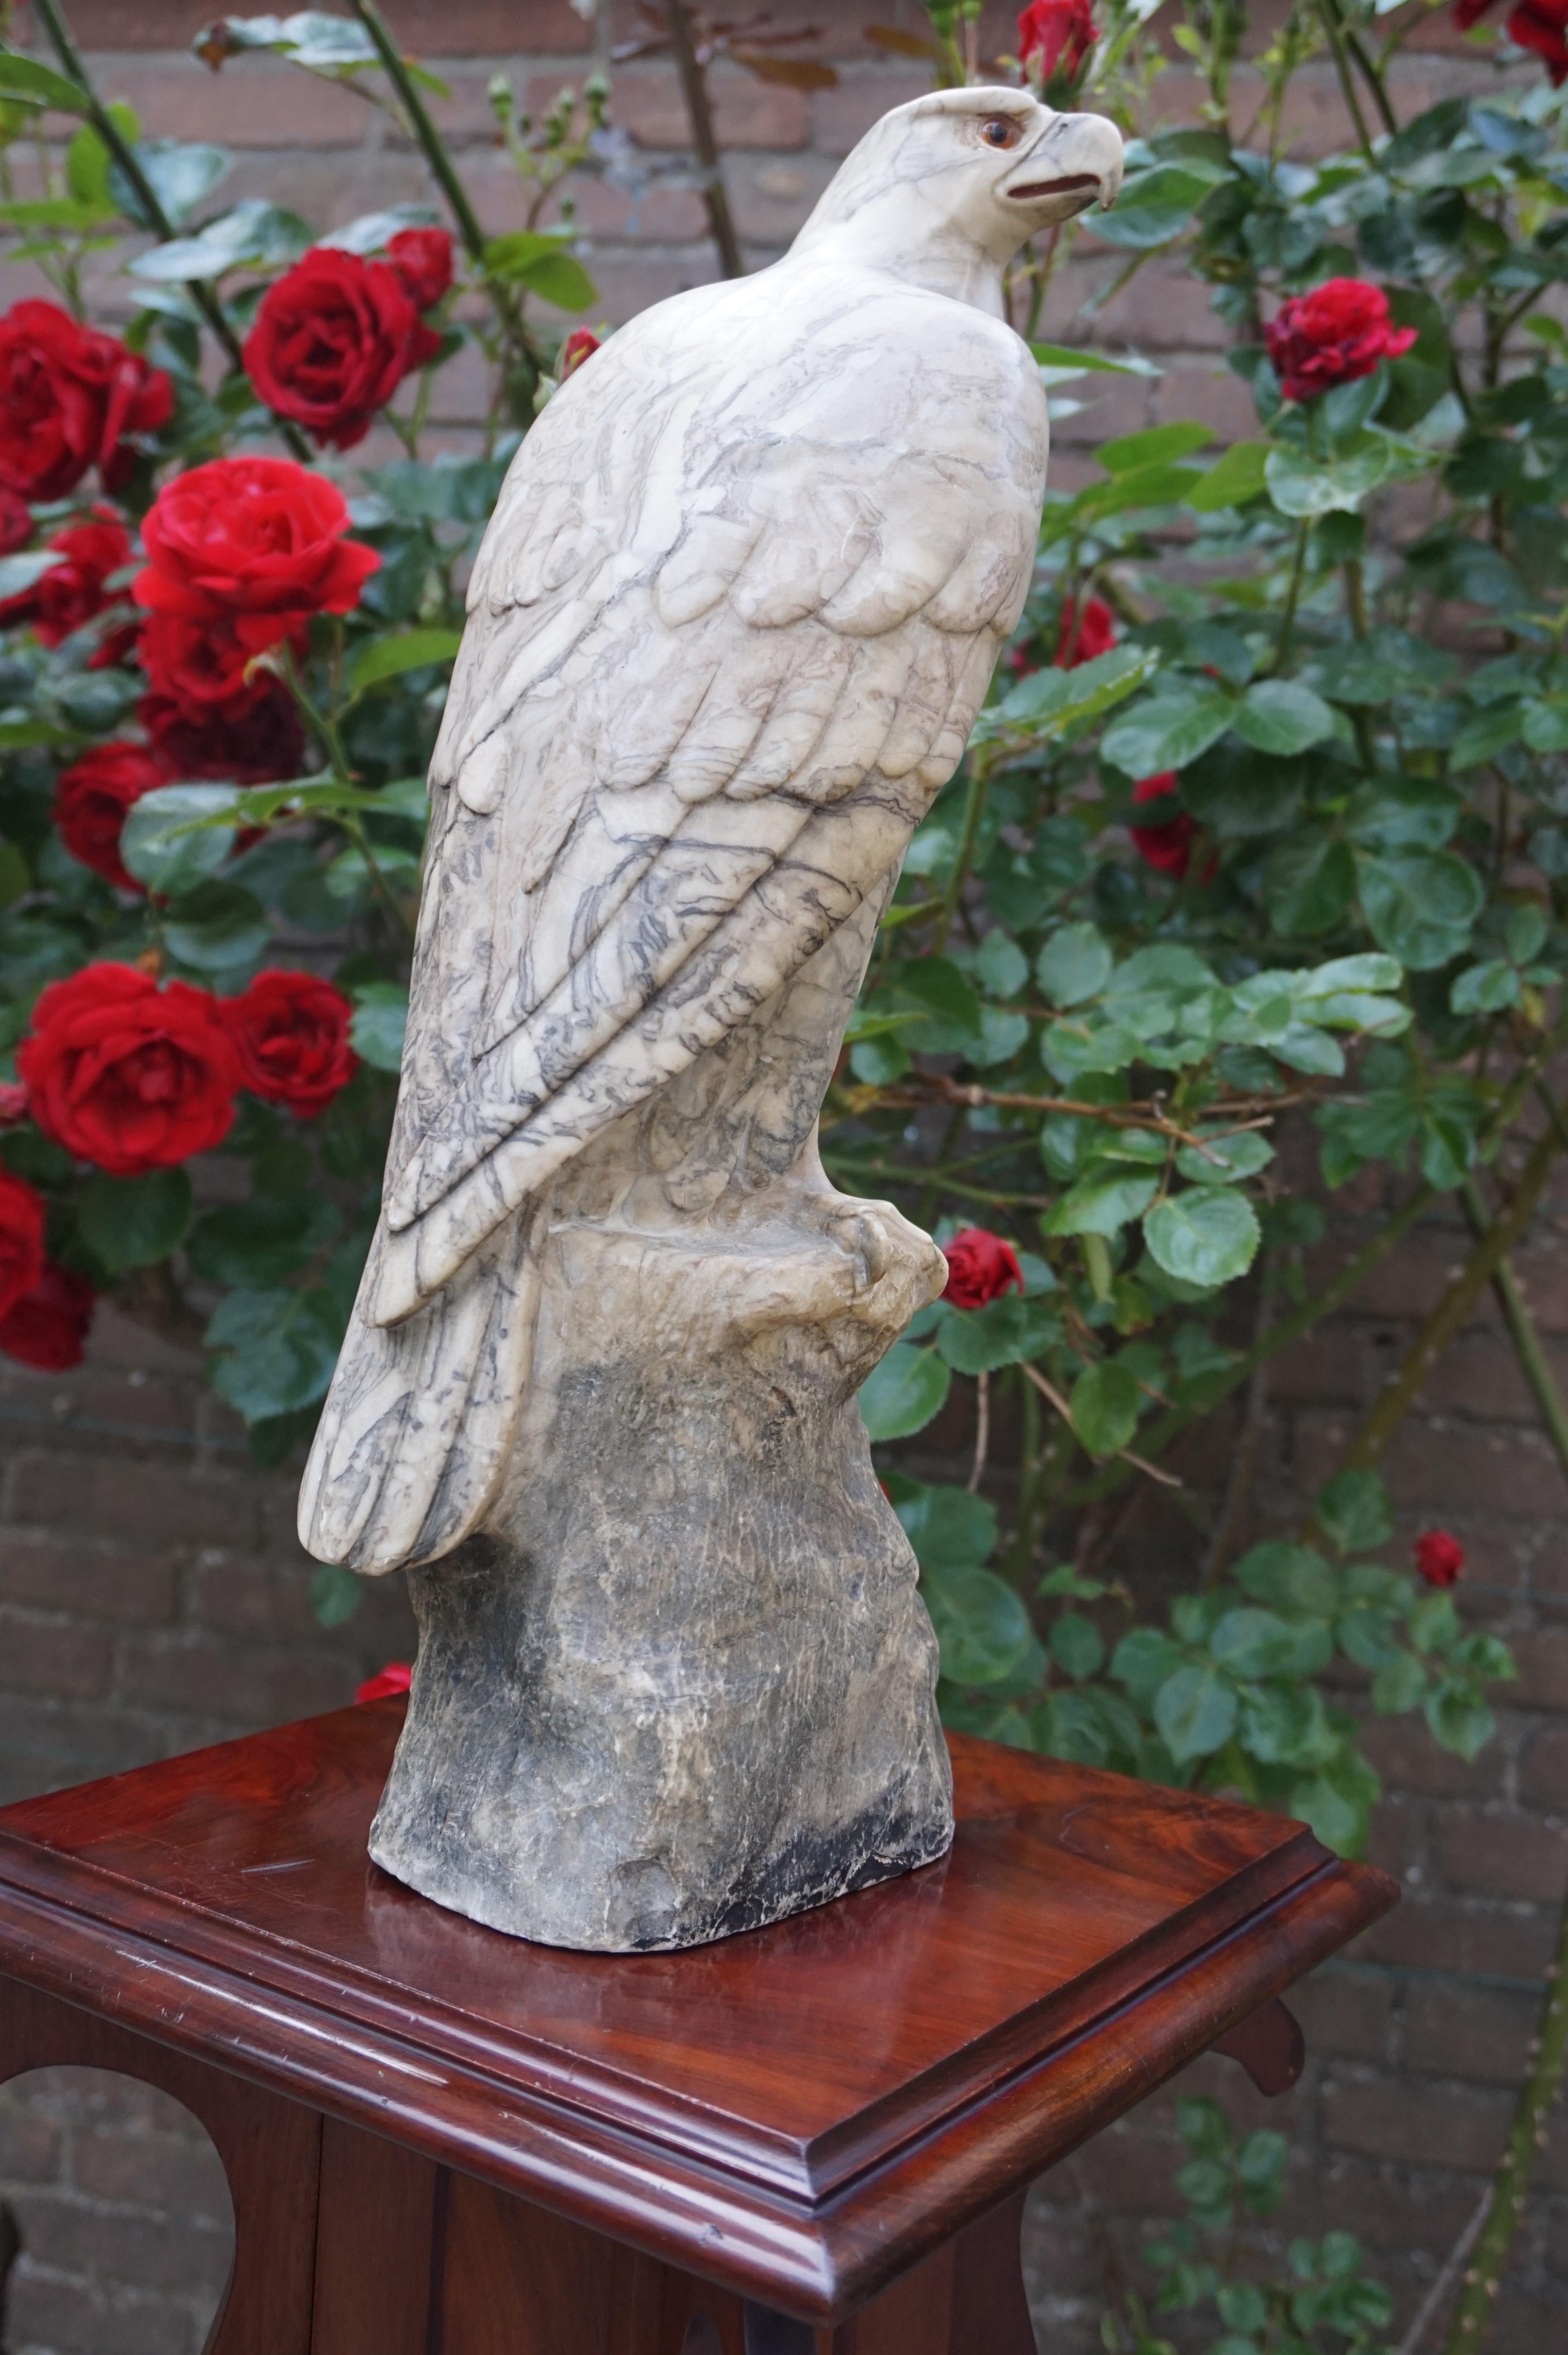 Magnificent marble eagle sculpture.

Most people are not capable of drawing a picture of an eagle, but this artist has sculpted a majestic and lifelike eagle out of rockhard marble. That, to me, is amazing and it takes a truly gifted craftsman. This